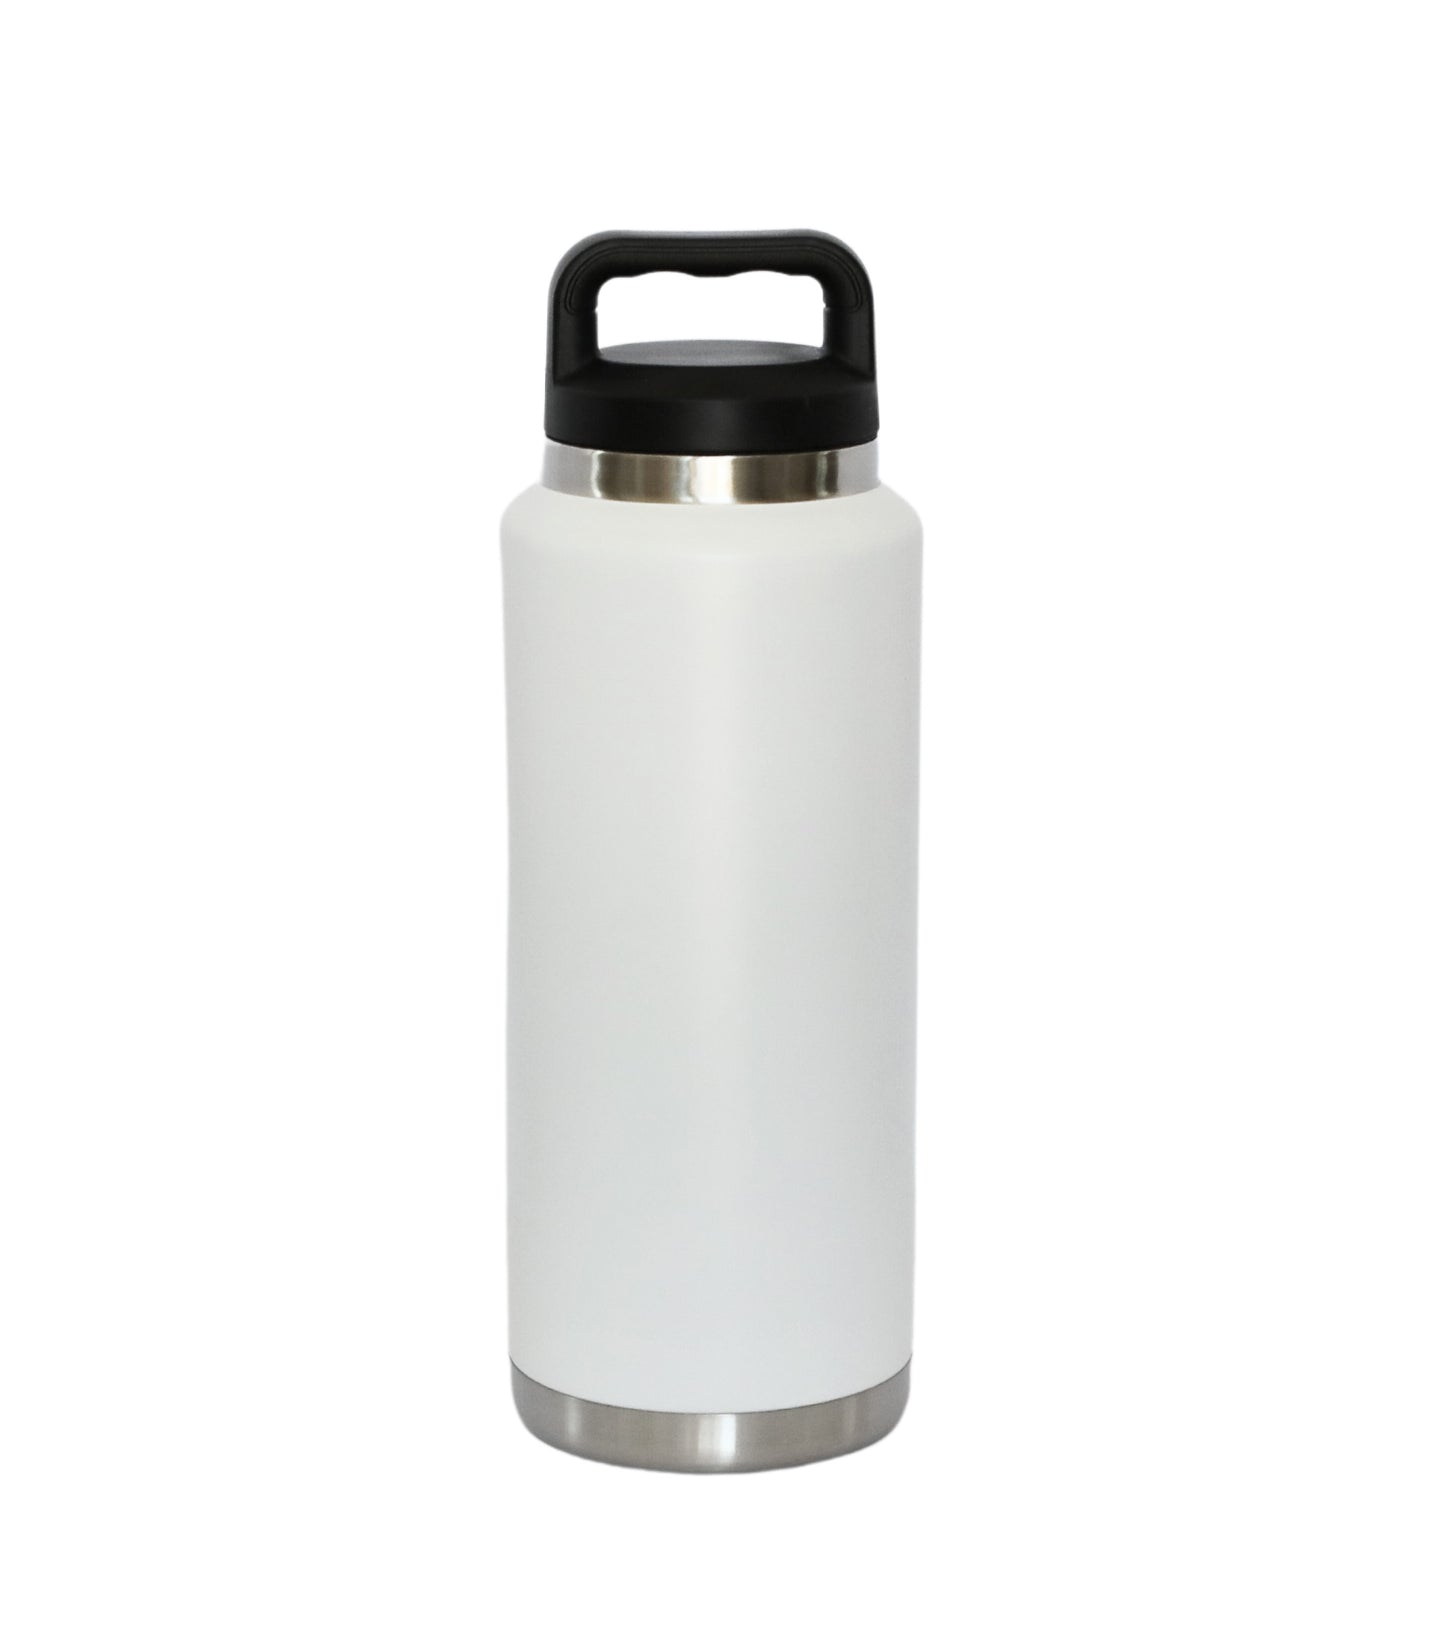 36 Oz Stainless Steel Water Bottle - White